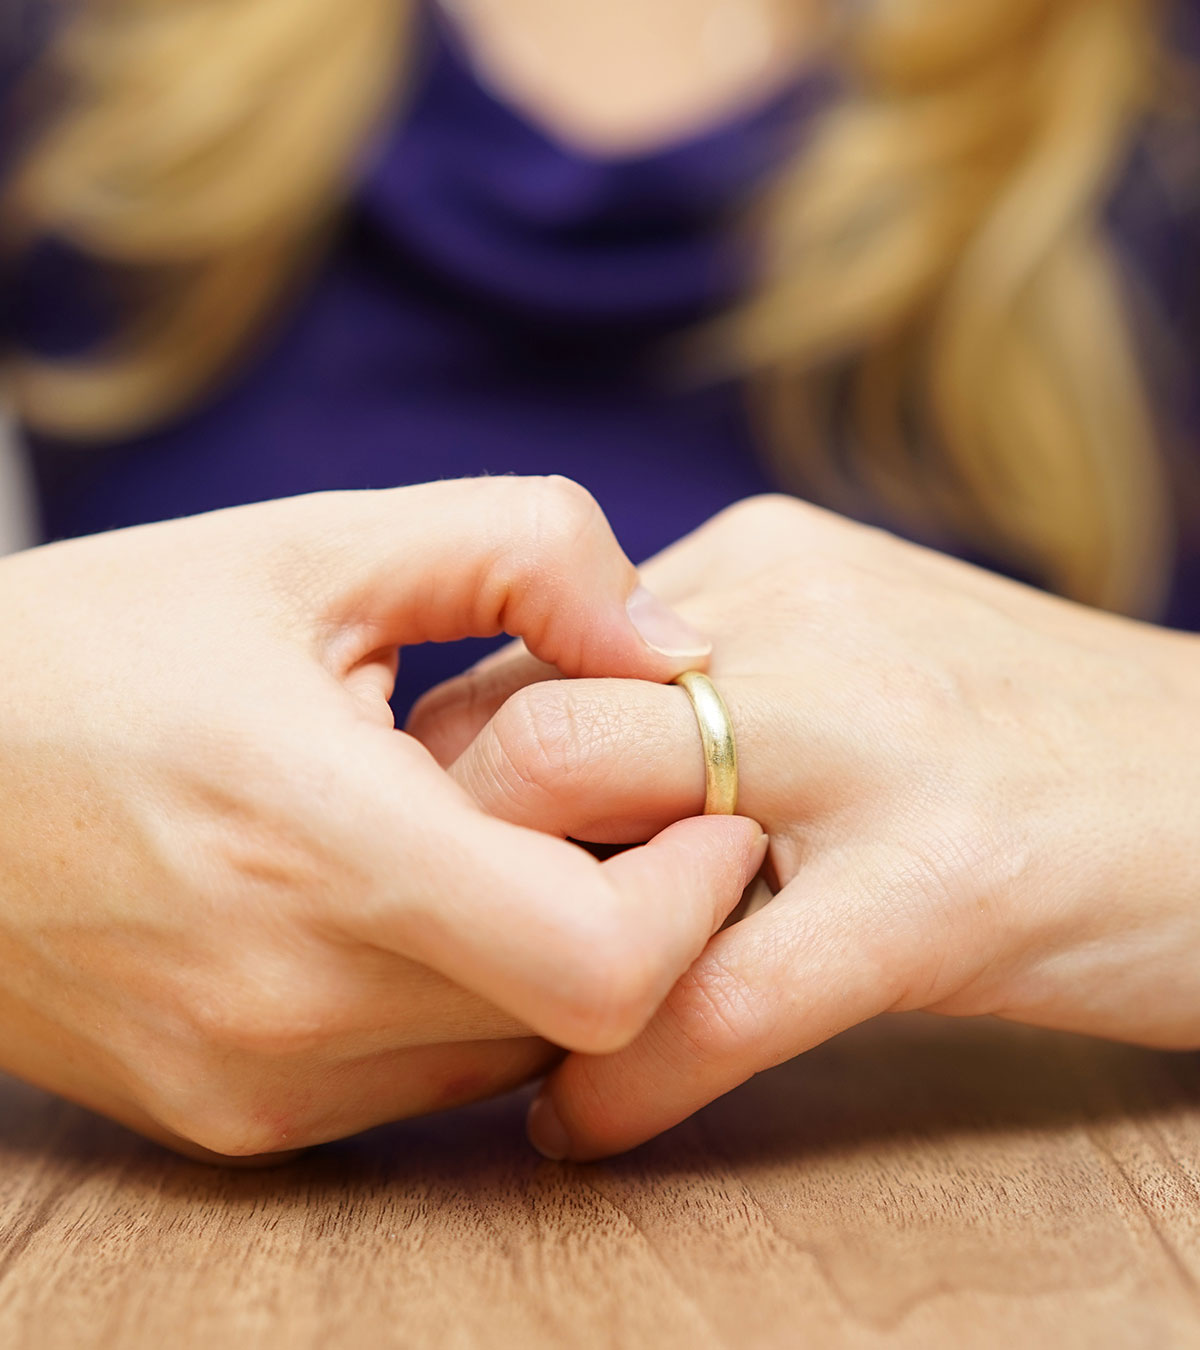 6 Devastating Causes Of Loneliness In Marriage And Ways To Deal With It